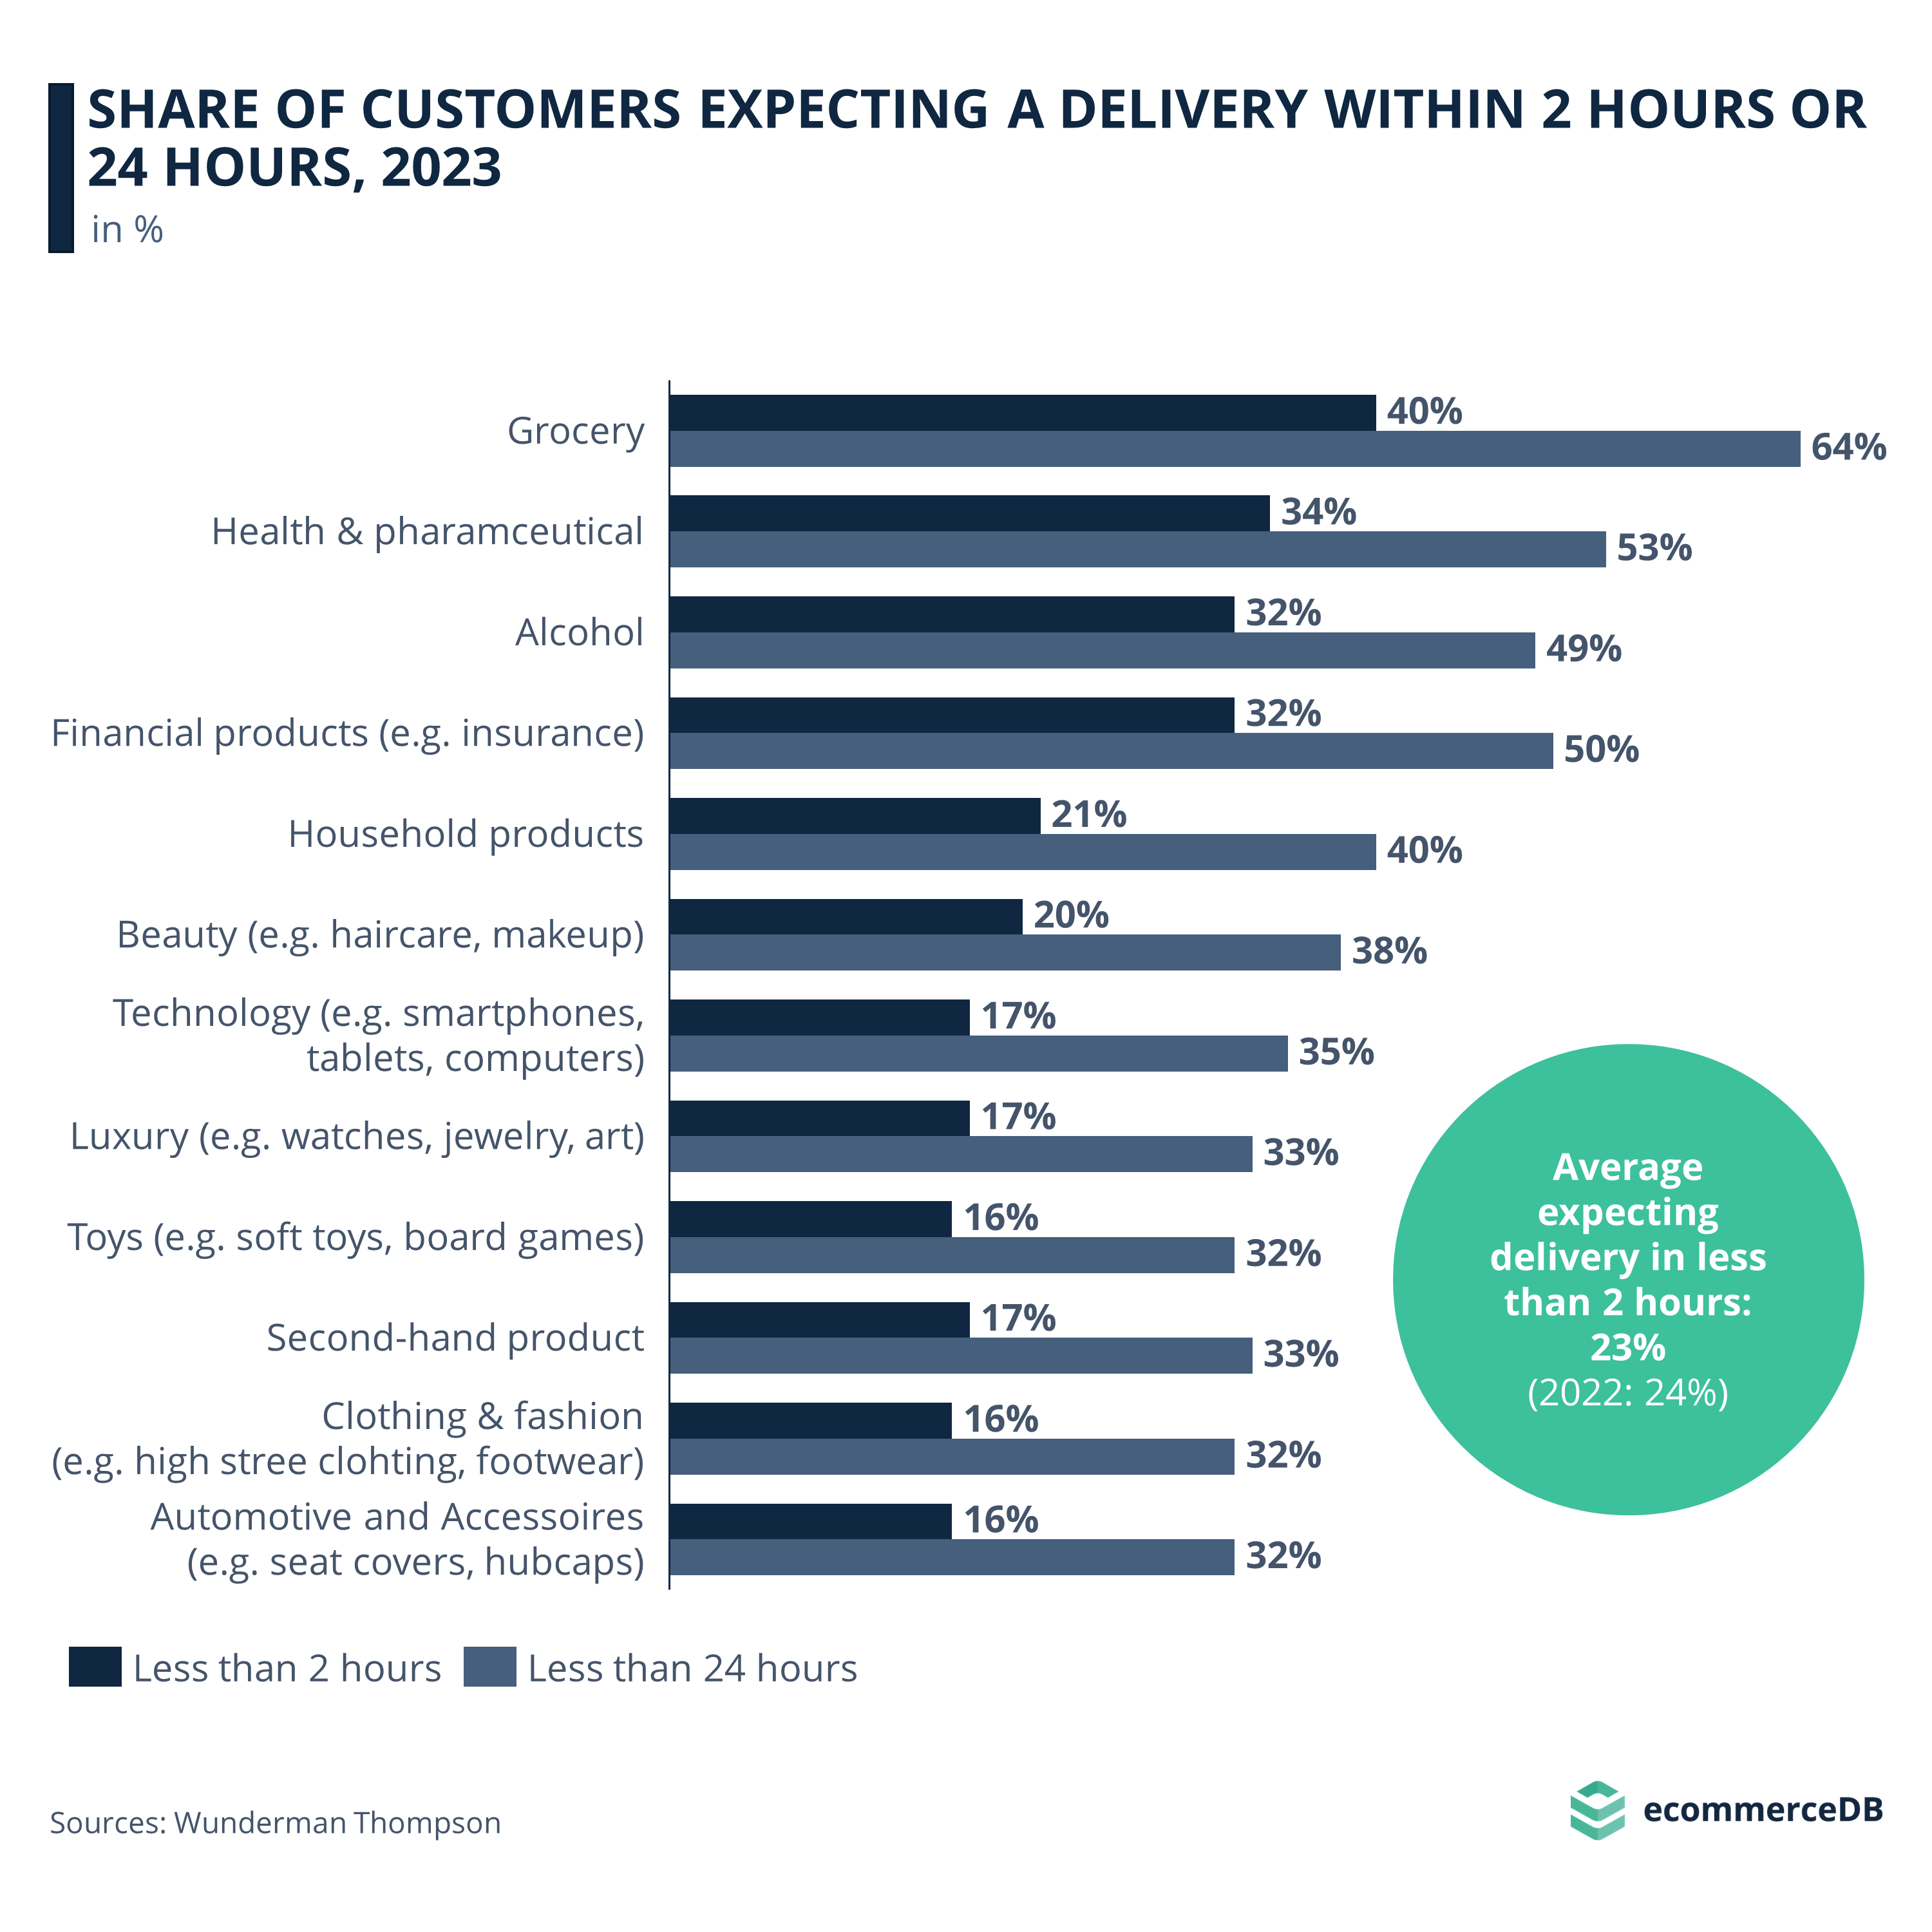 Share of Customers Expecting a Delivery within 2 Hours or 24 Hours, 2023